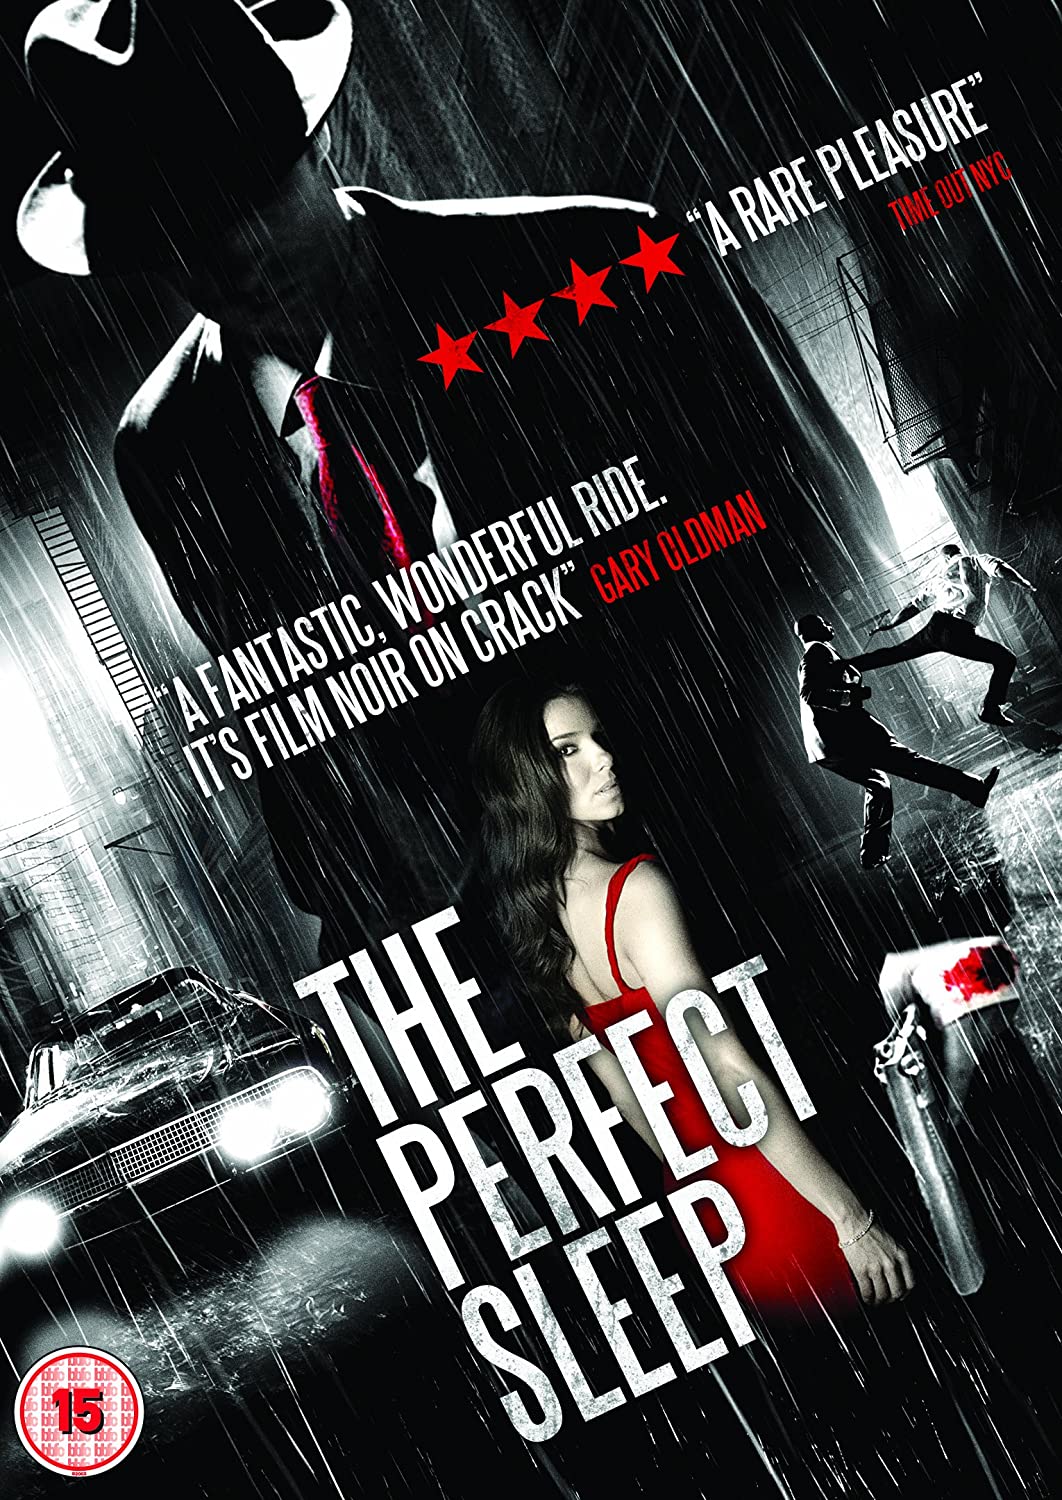 The Perfect Sleep - Action/Thriller [DVD]